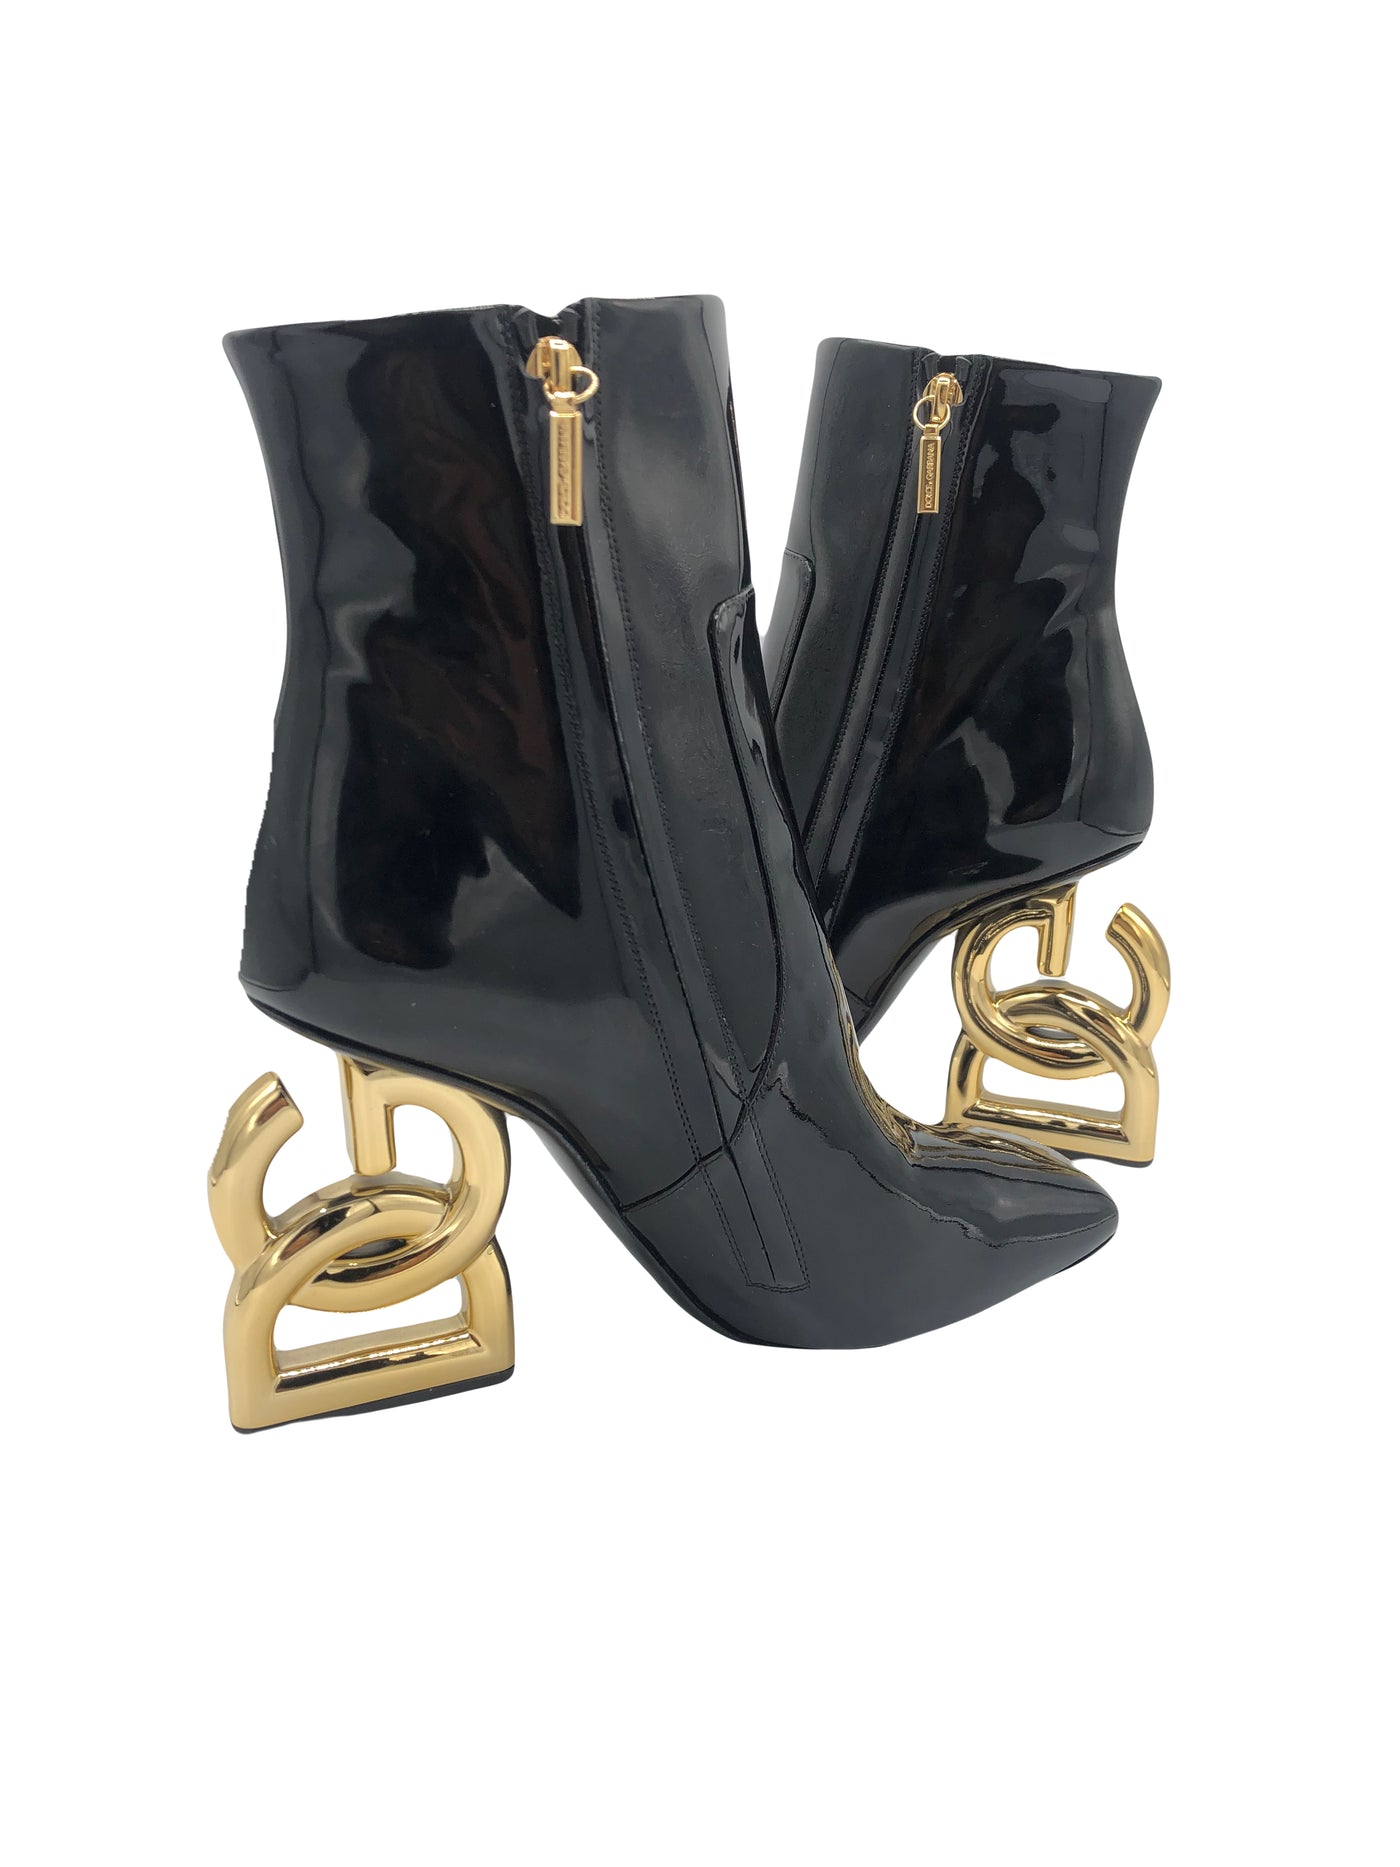 DOLCE GABBANA Patent Boots with “DG” gold heels size 38.5 * Never worn* RRP: £1250